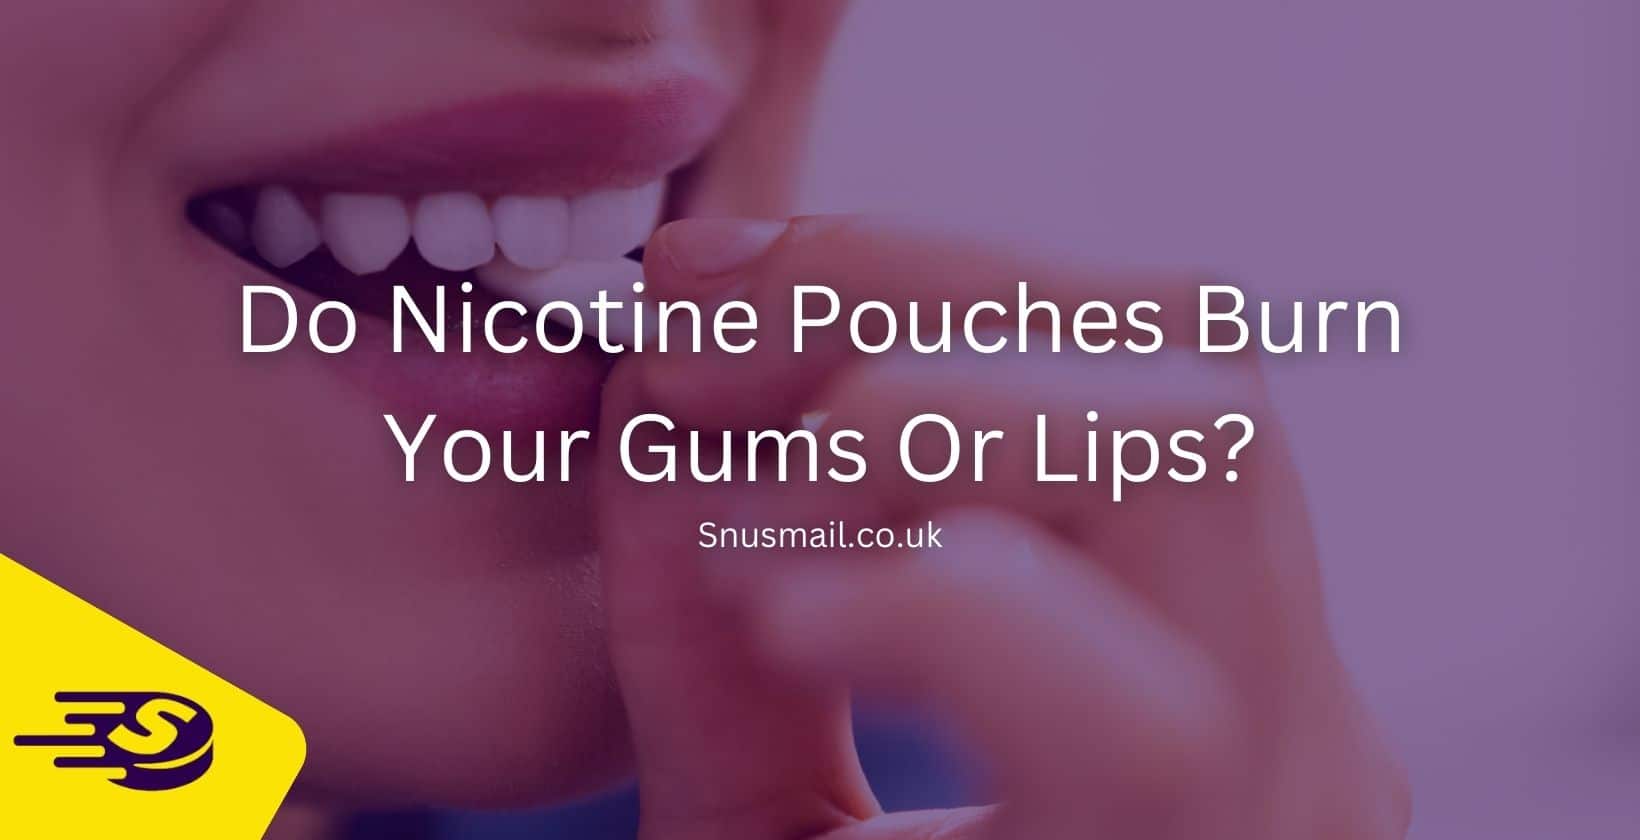 do nicotine pouches burn your lips or gums